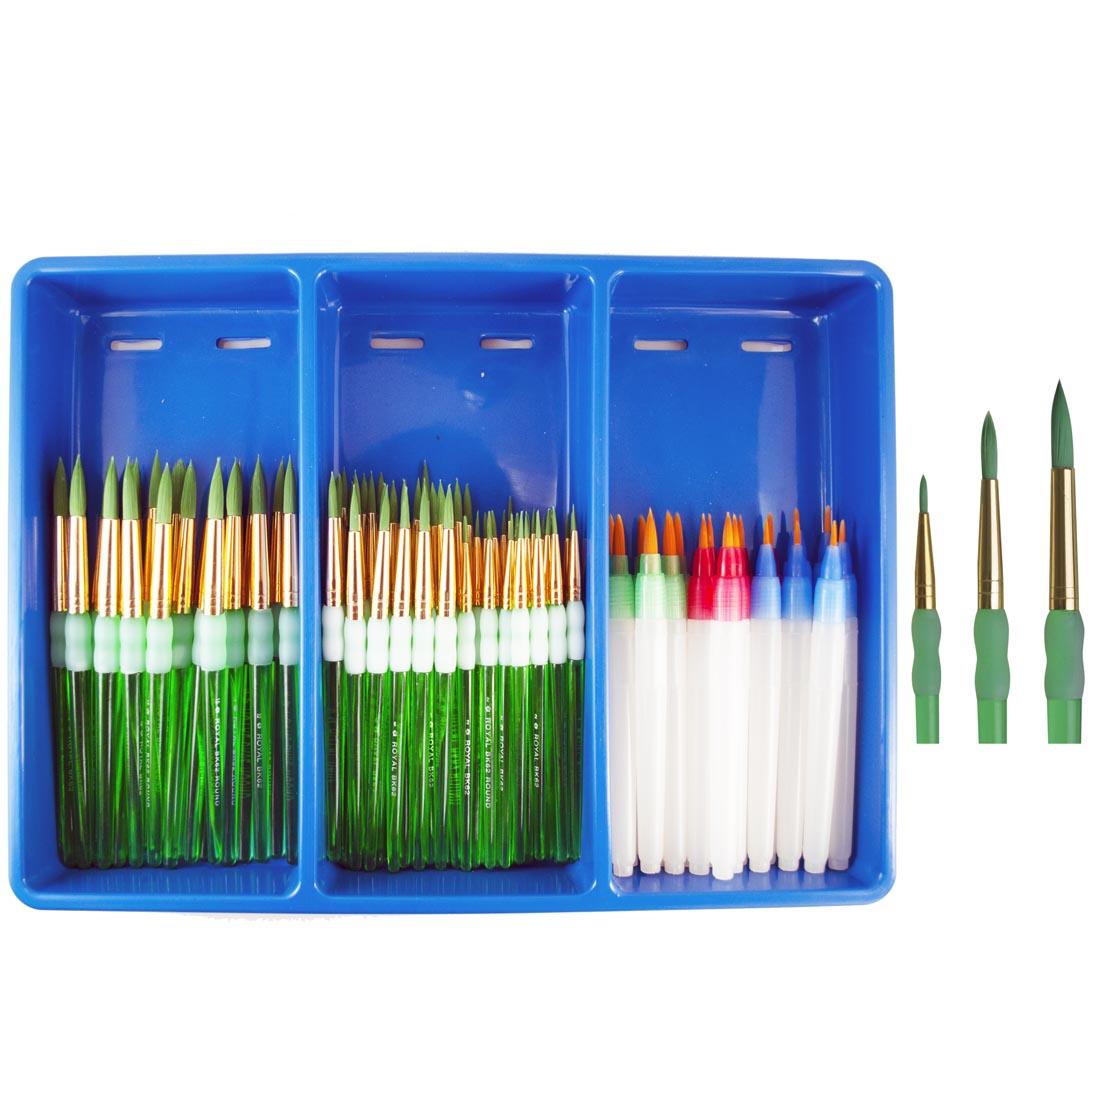 Royal & Langnickel Big Kid's Choice Lil' Grippers Round Brush Class Pack shown in the tray with examples of the 3 different brush sizes beside it